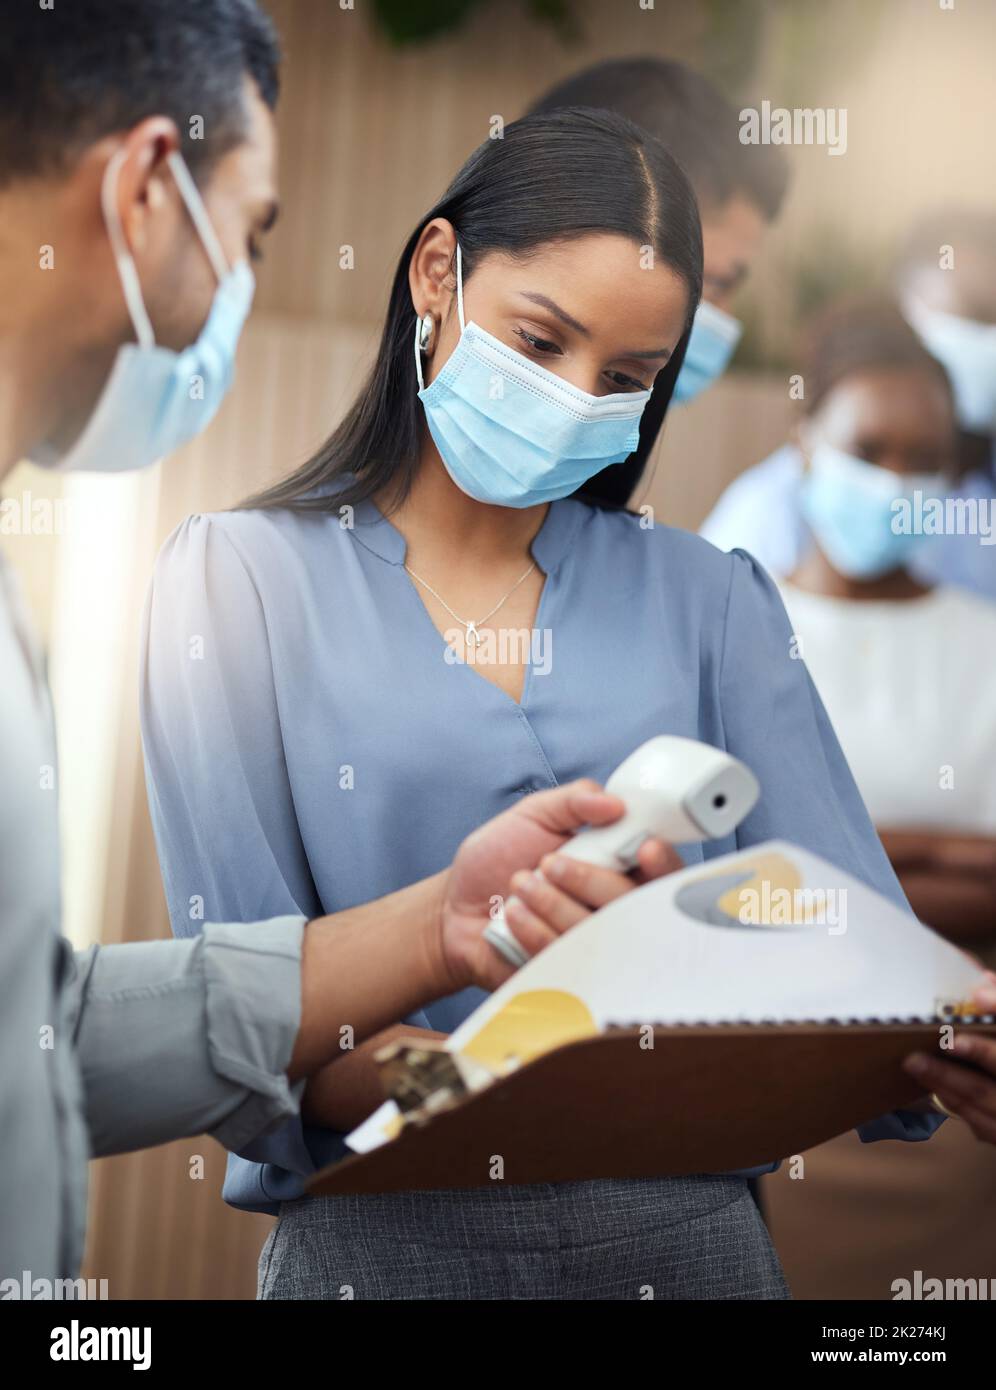 Once the screening is done, she can get to work Stock Photo